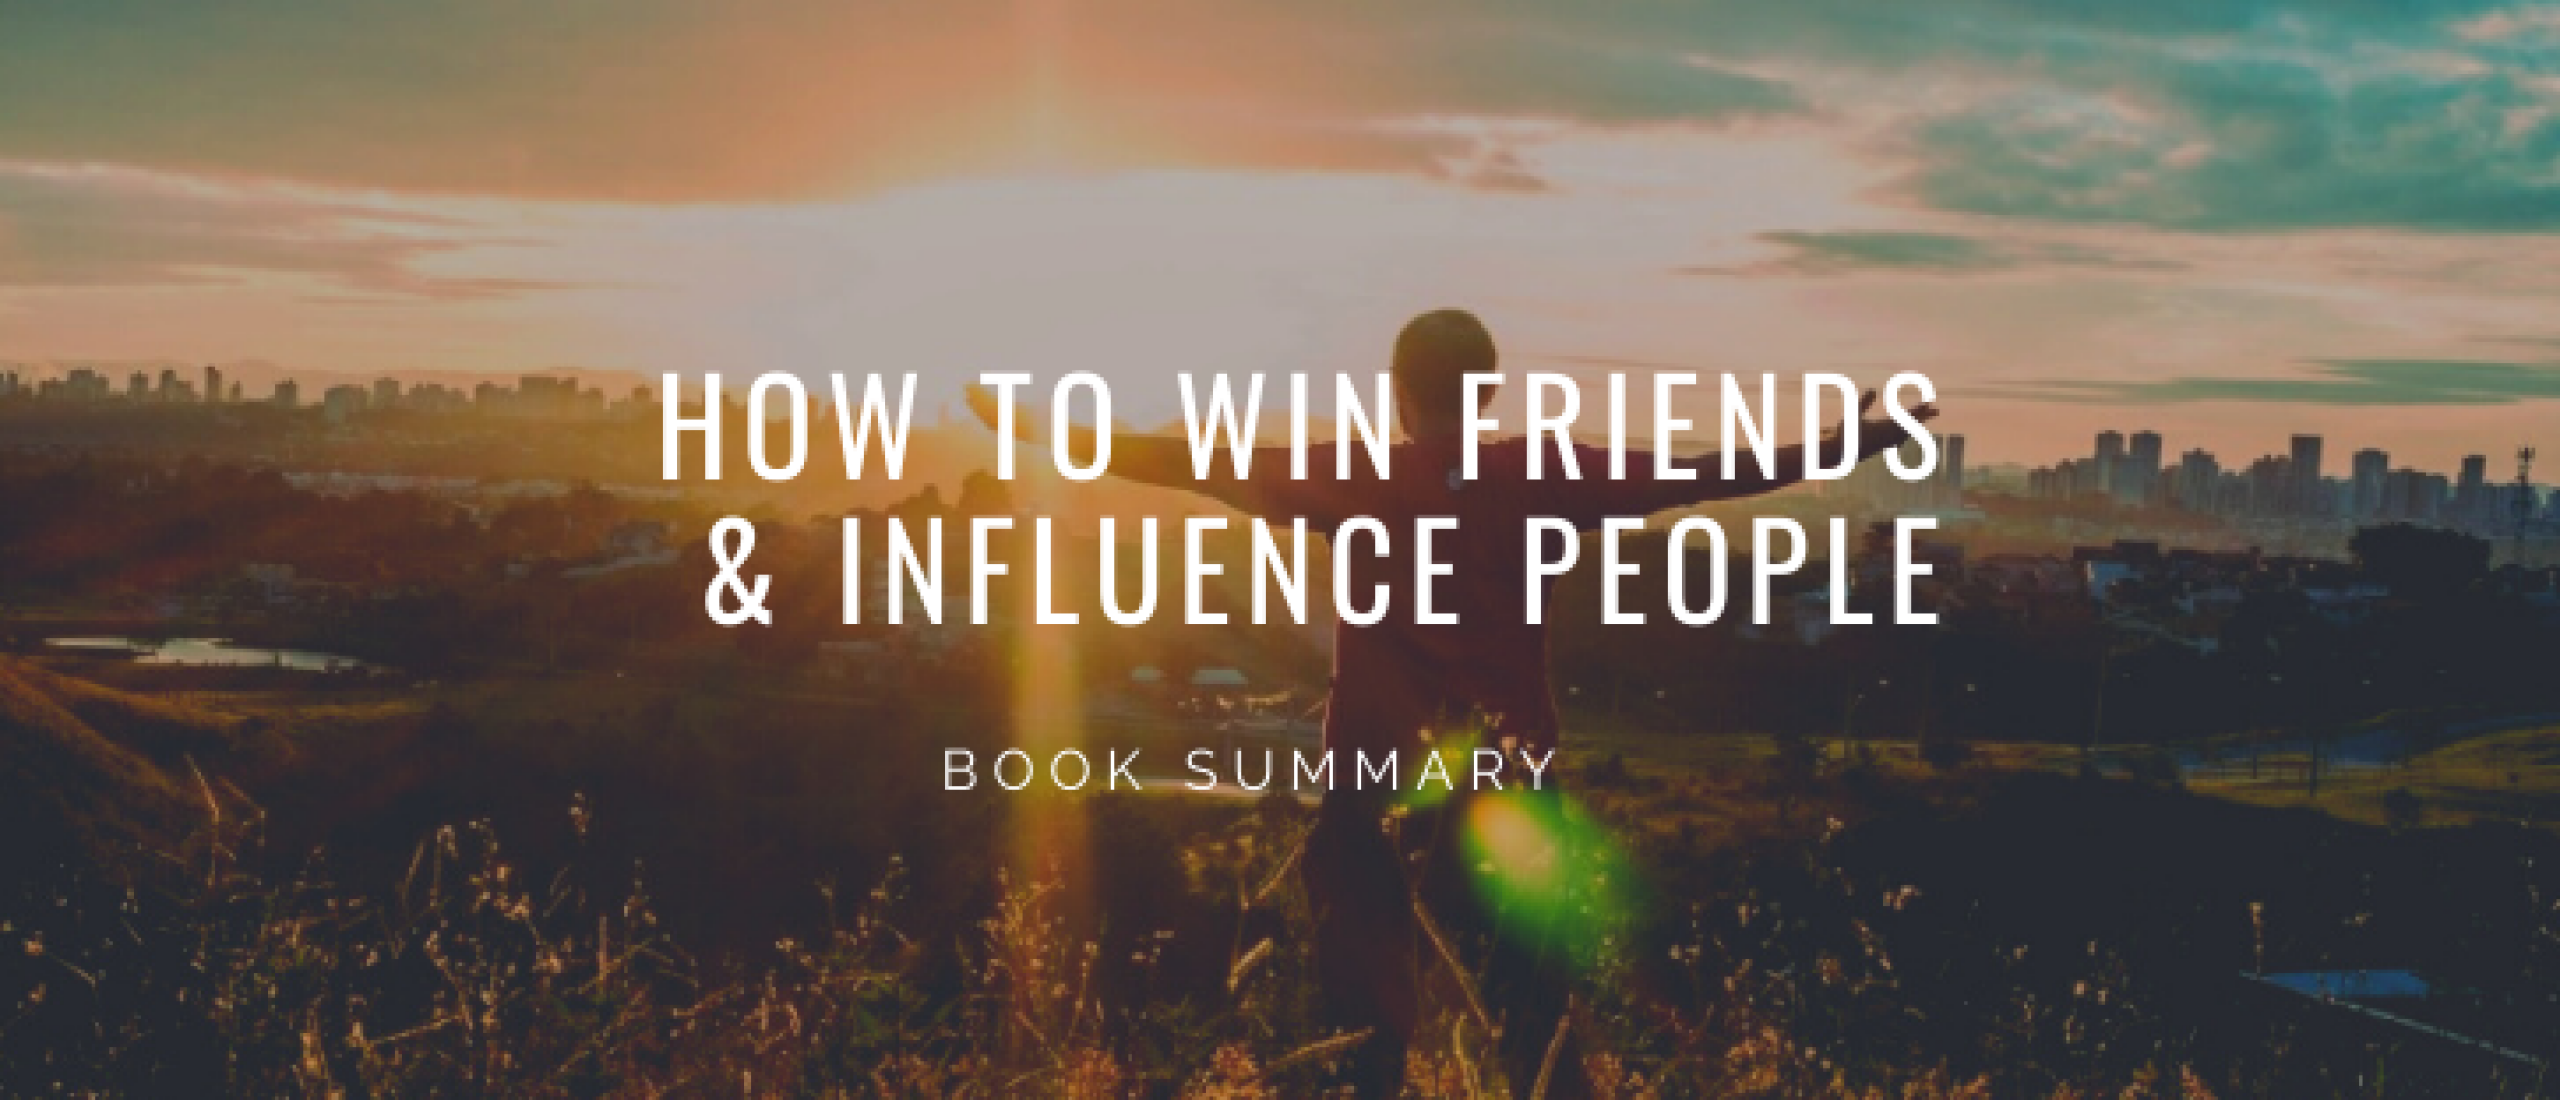 Summary ‘How to Win Friends & Influence People’